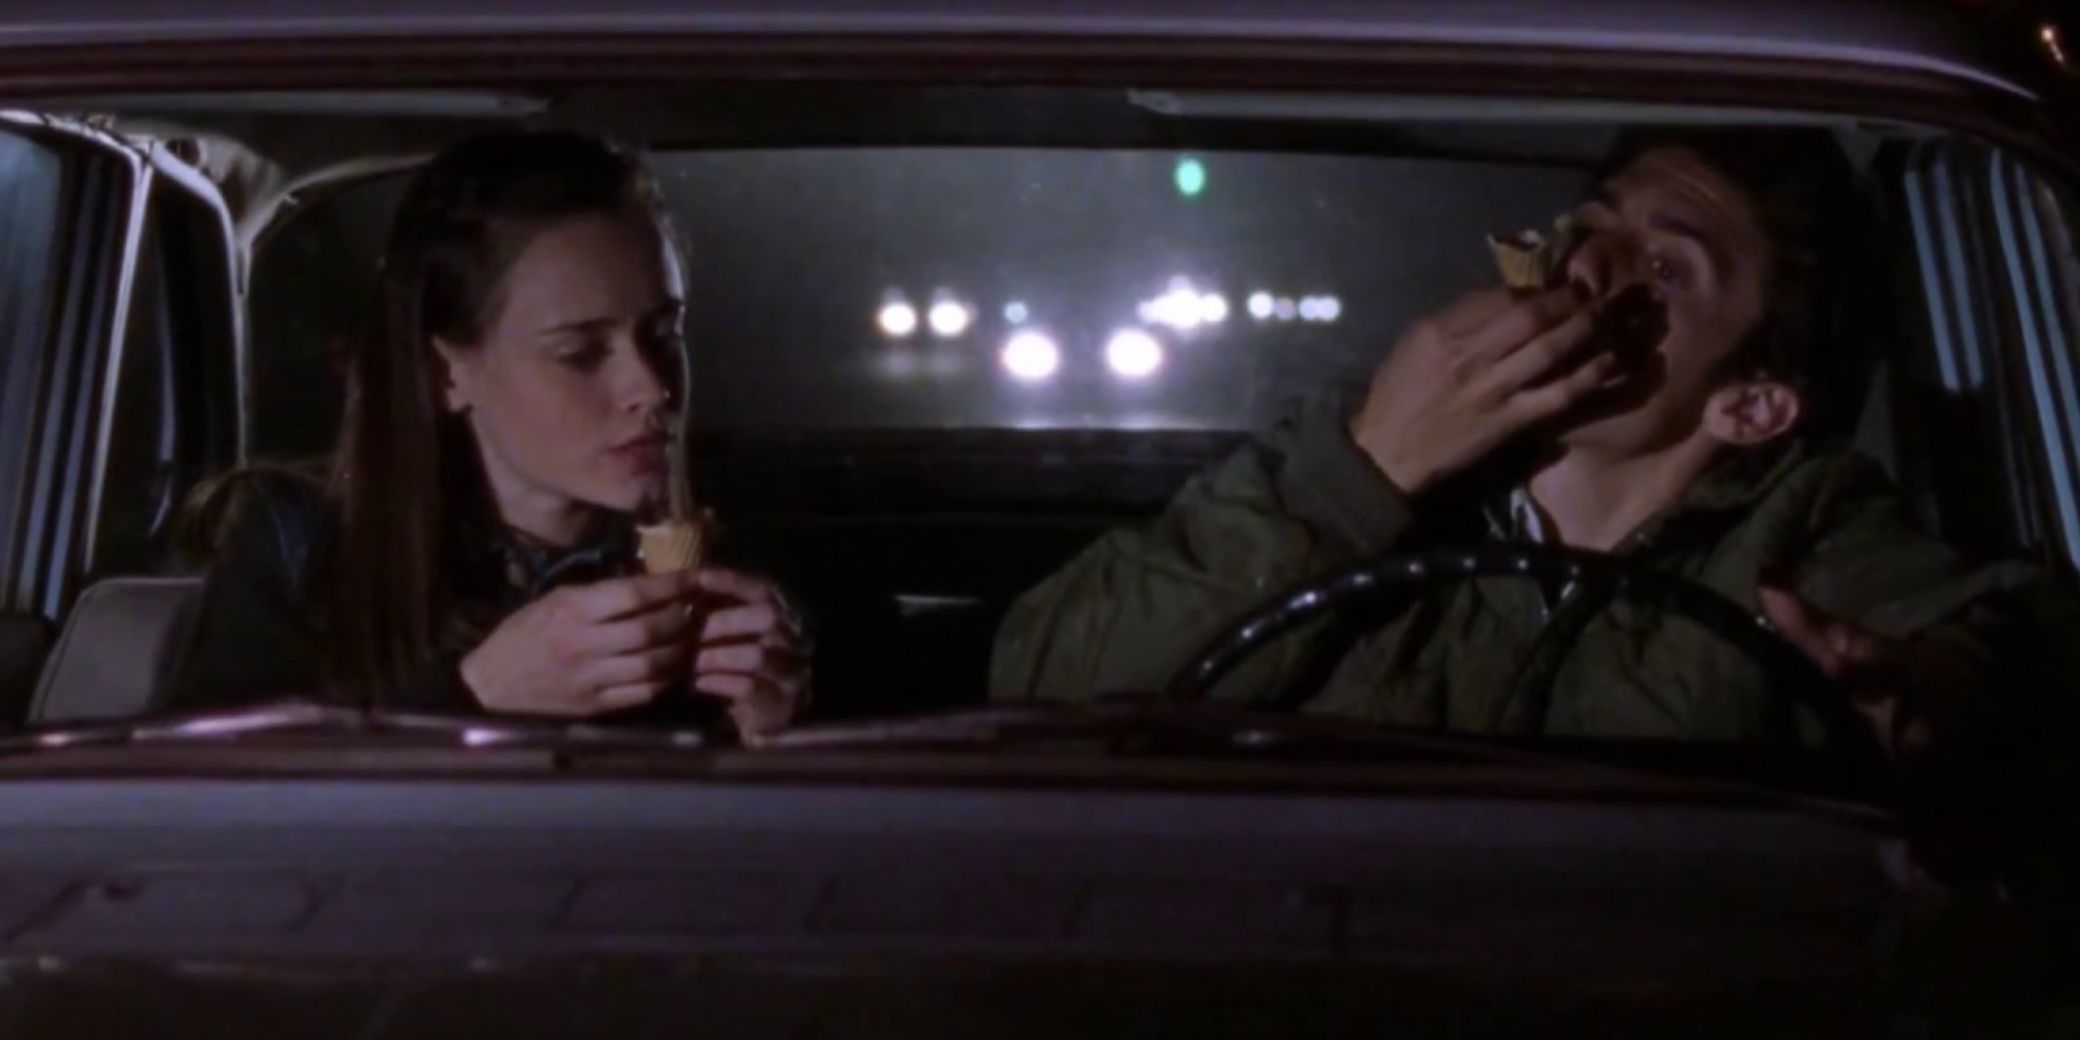 Rory and Jess eating ice cream in the car in Gilmore Girls